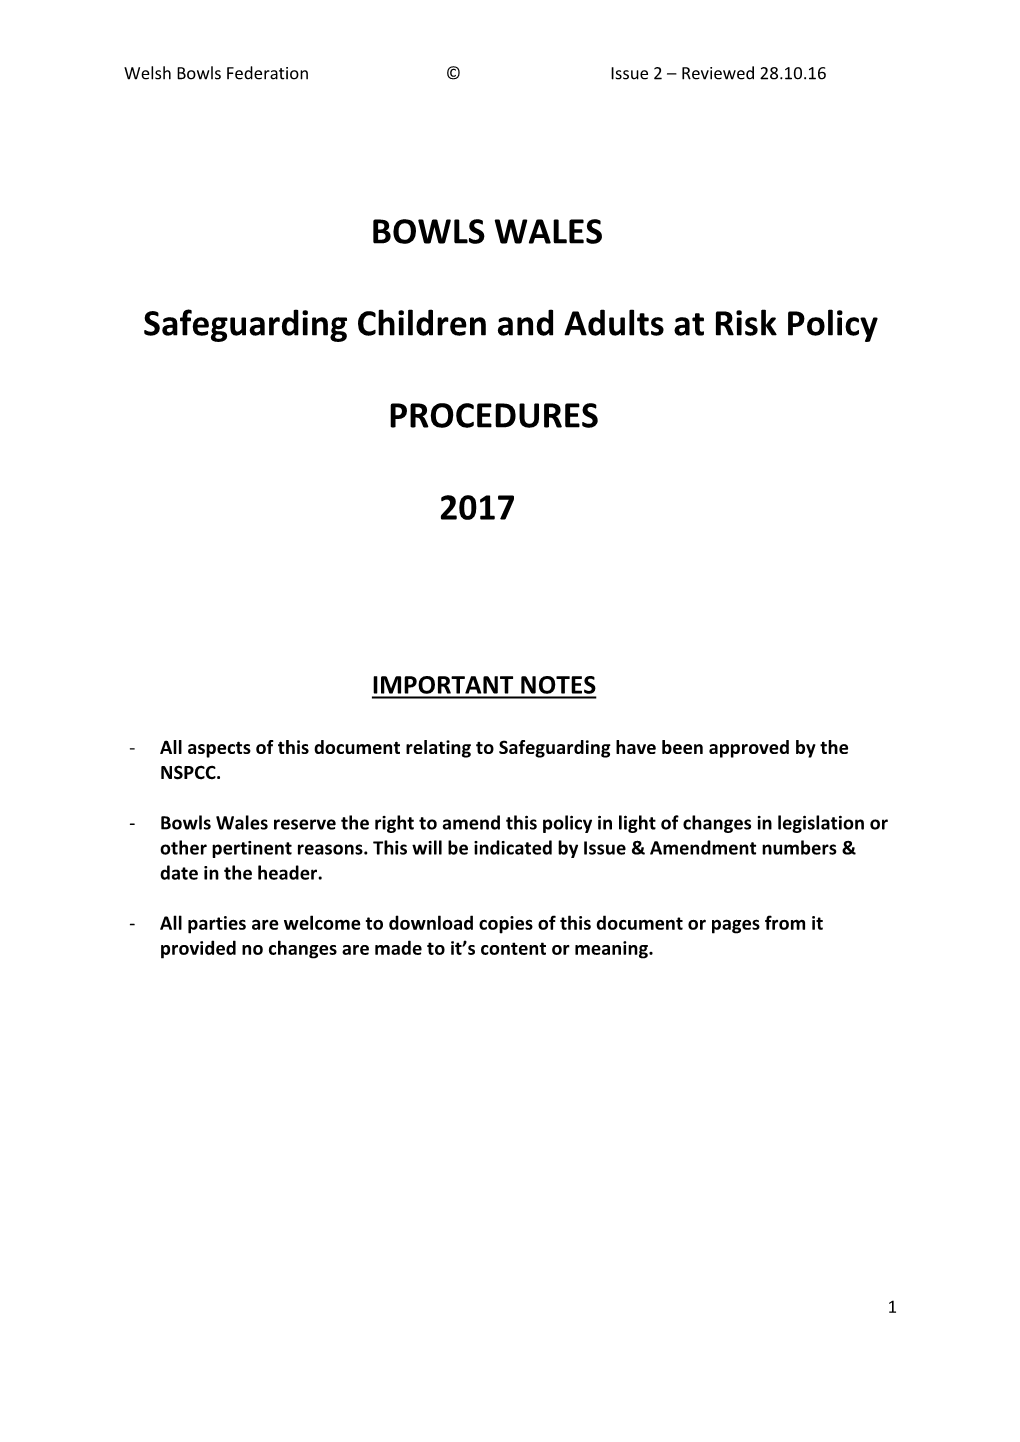 BOWLS WALES Safeguarding Children and Adults at Risk Policy